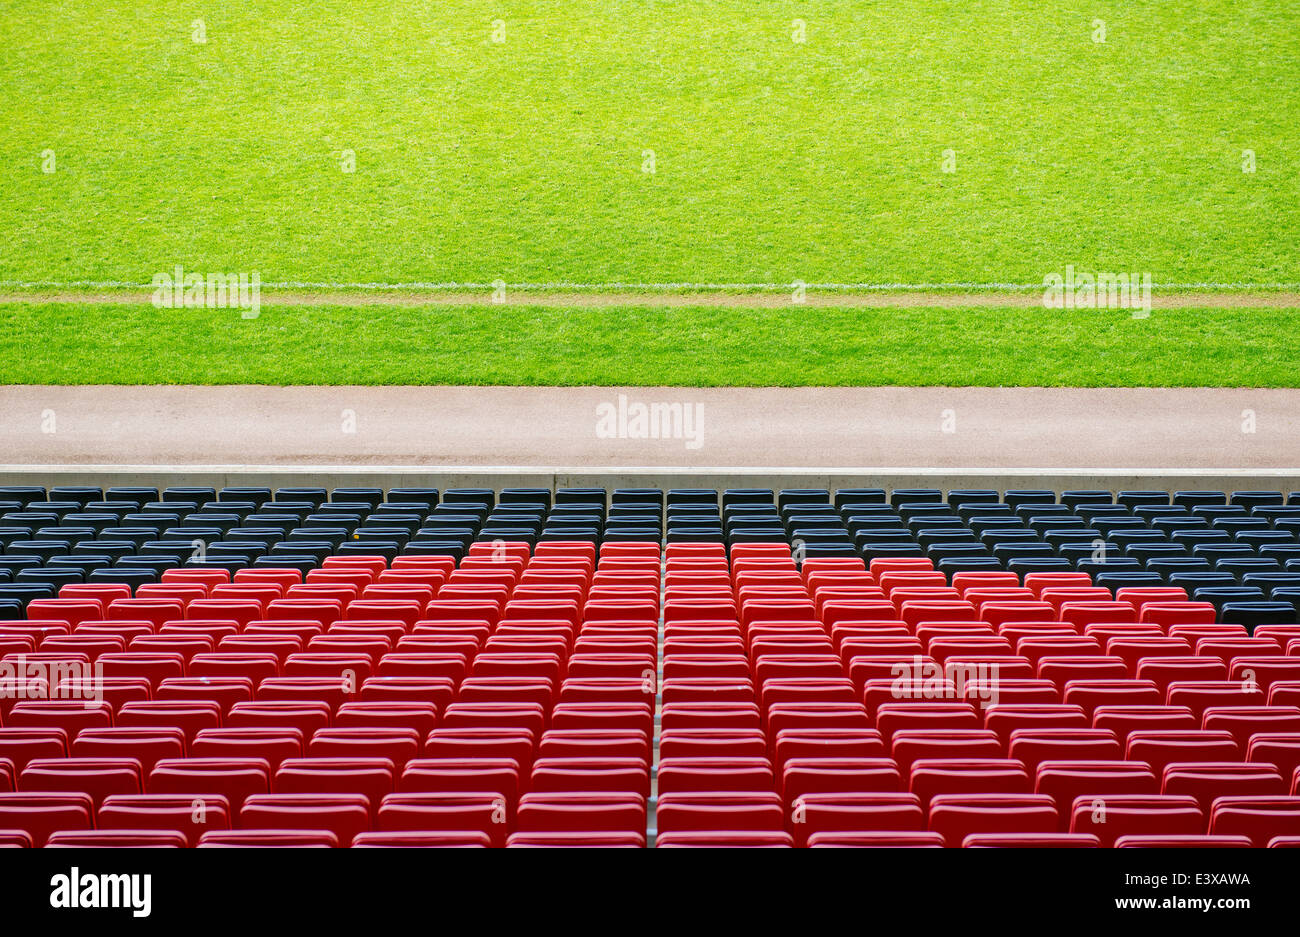 Rows of empty seats for spectators at a football ground. Stock Photo